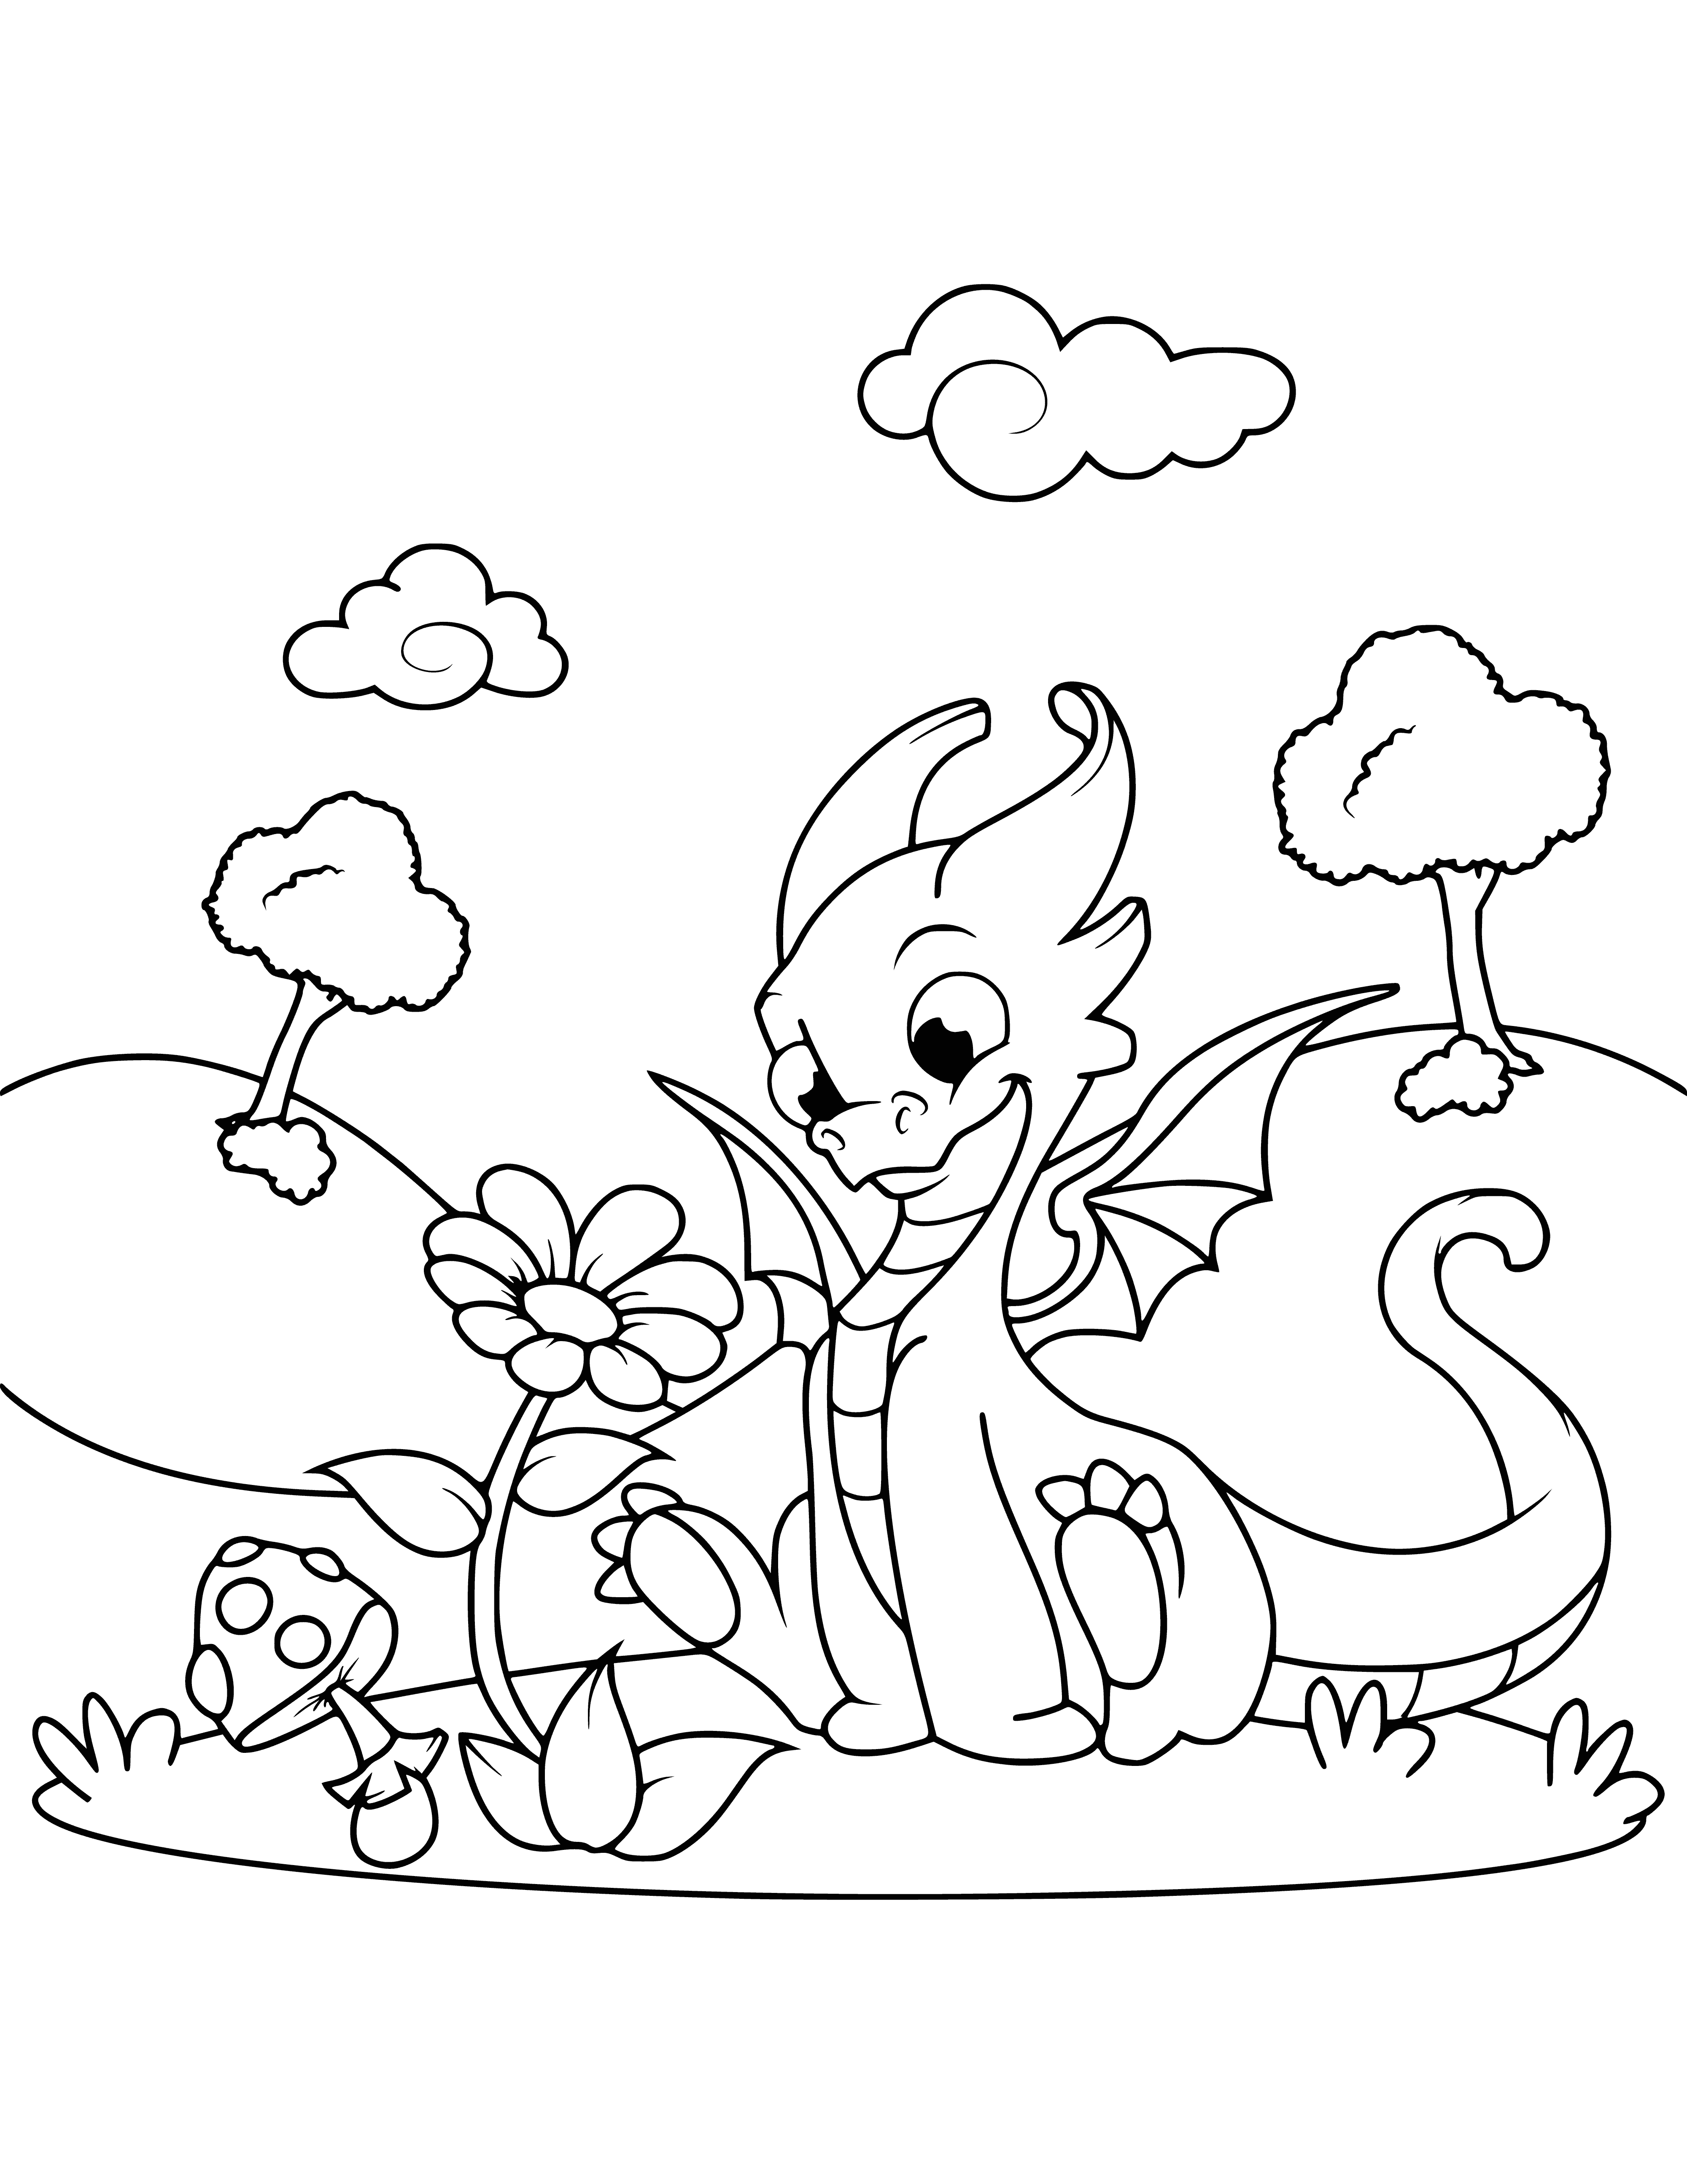 Little dragon near a flower coloring page